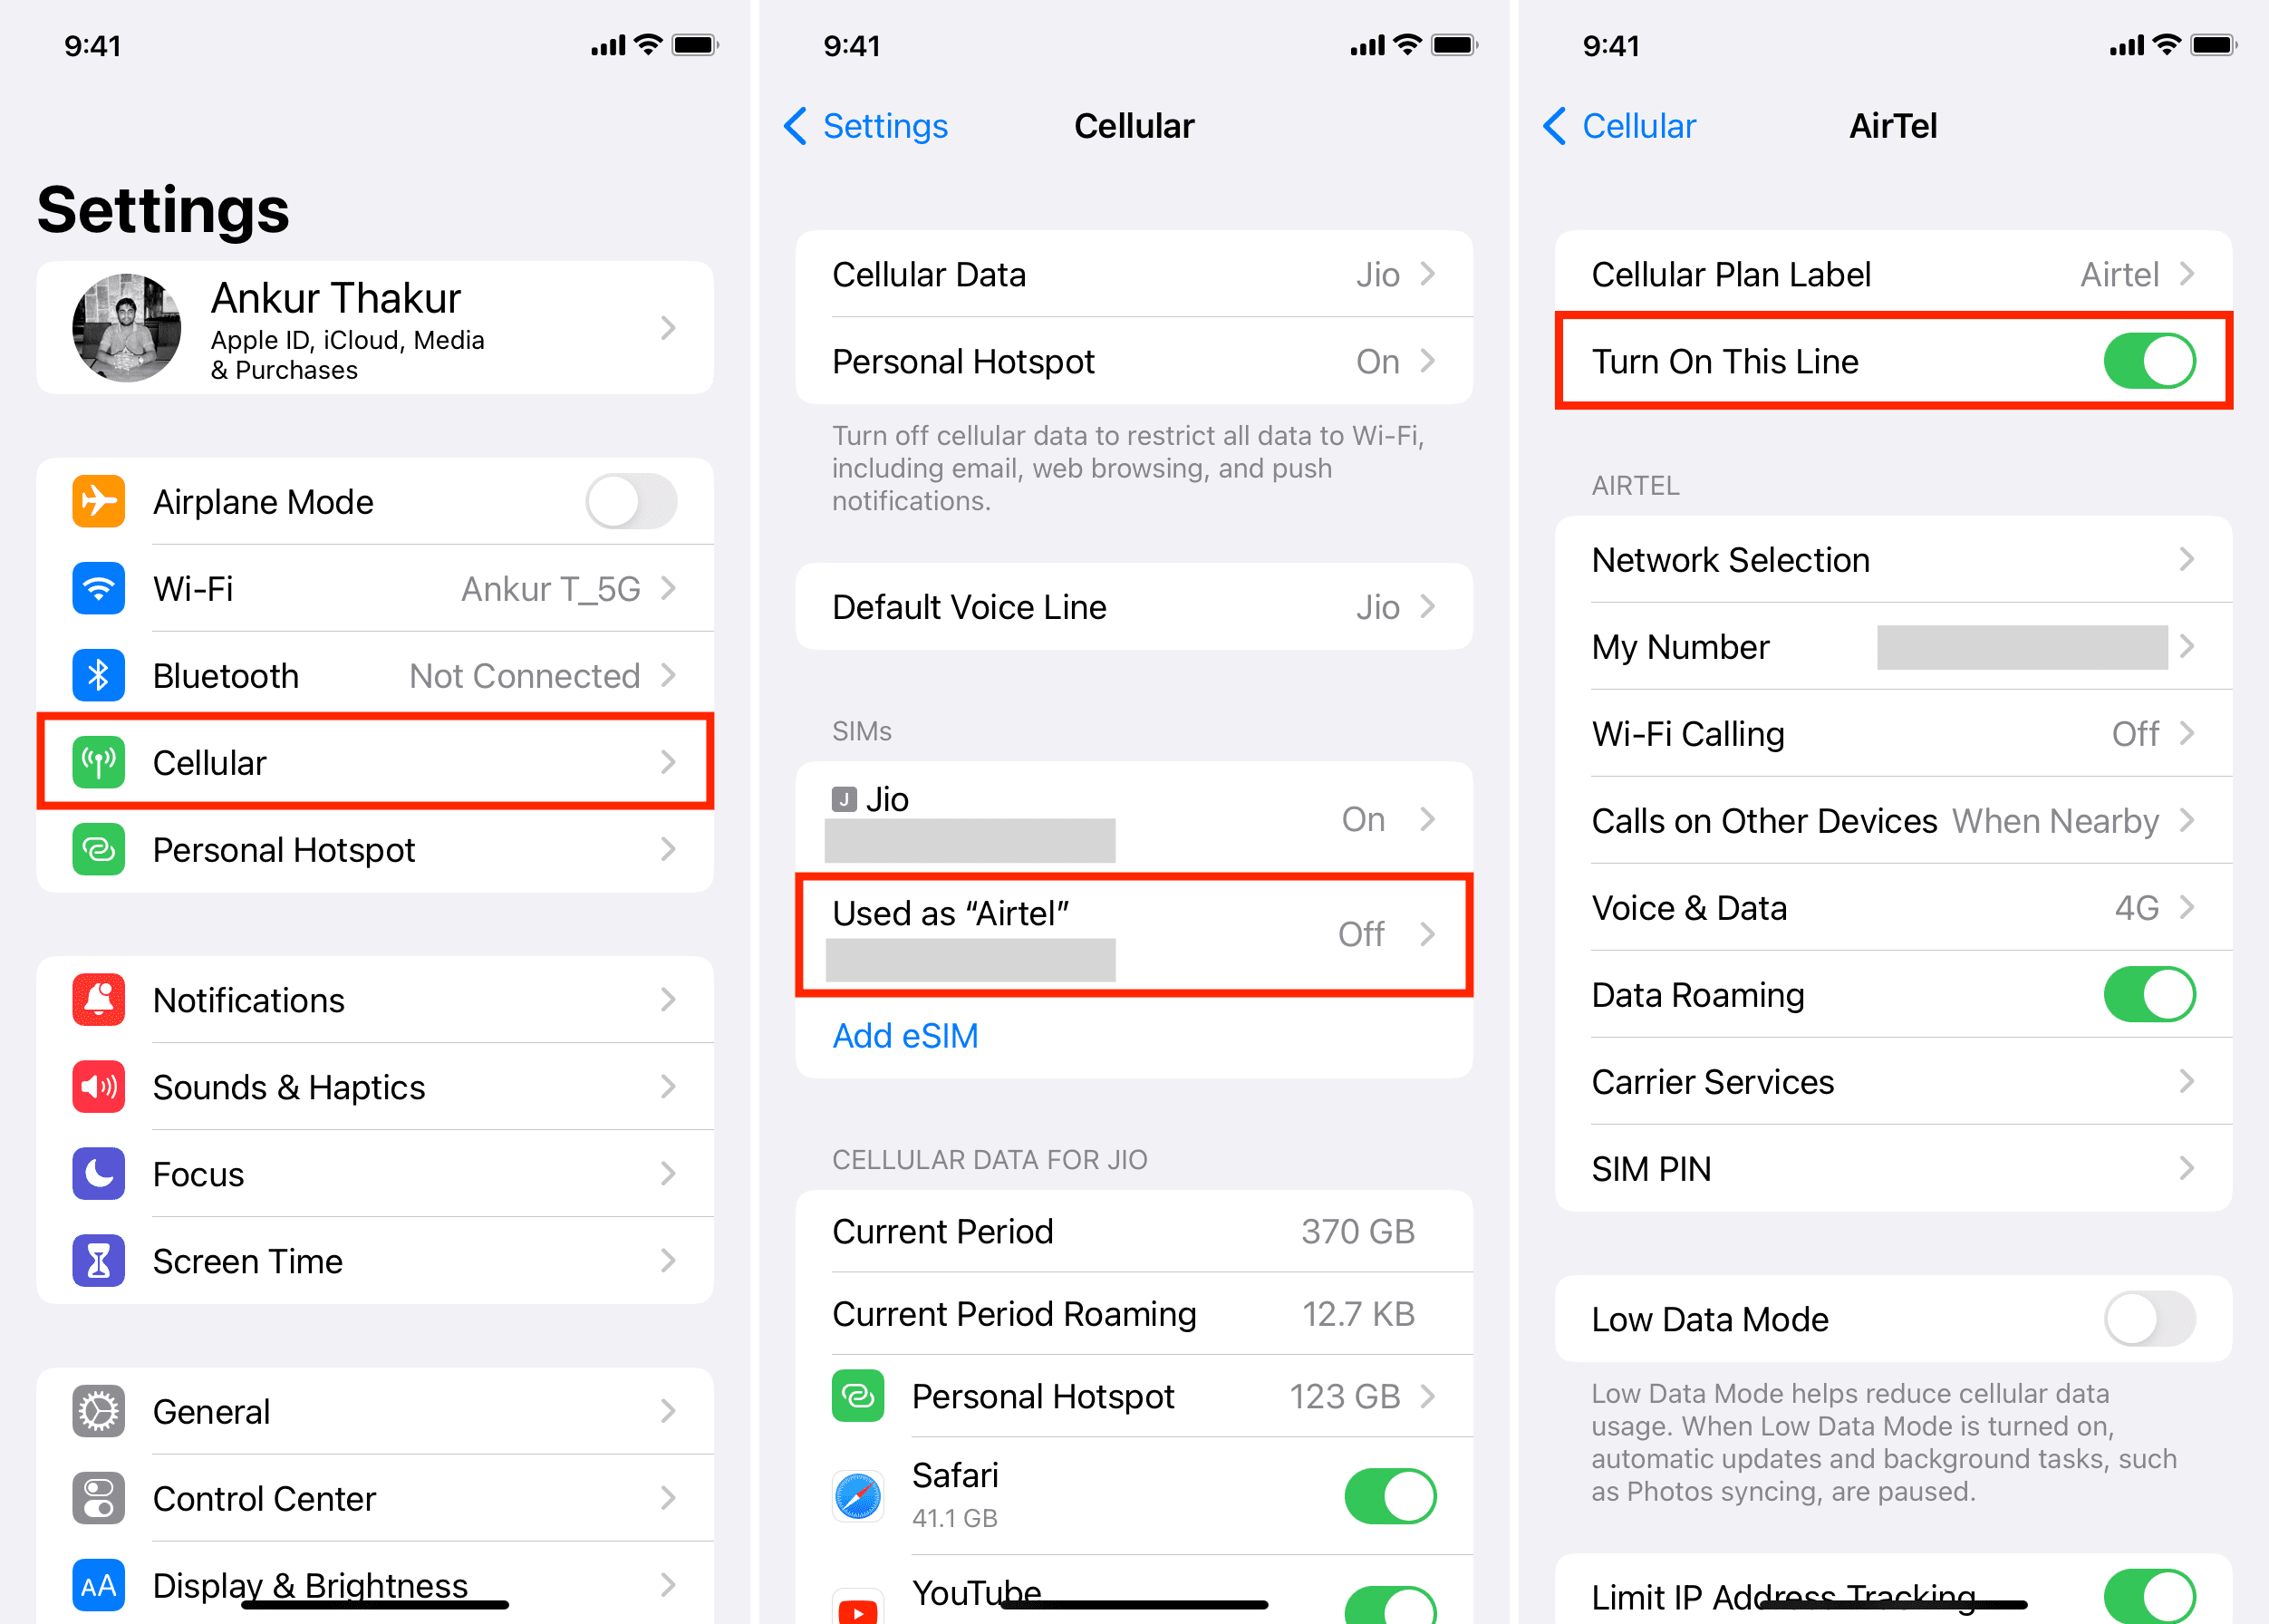 Turn On This Line from iPhone Cellular settings